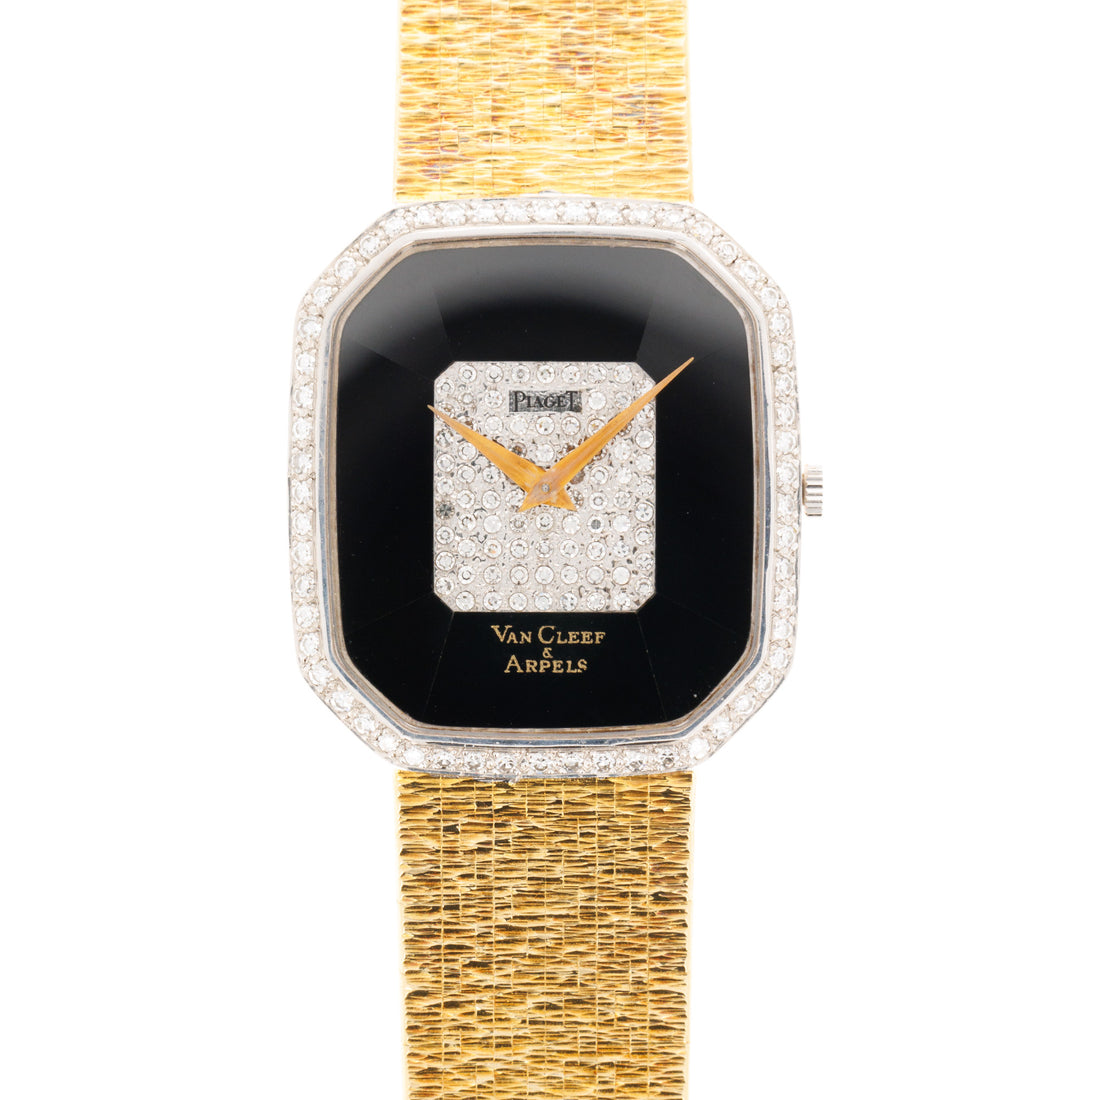 Piaget Yellow Gold Onyx Diamond ref 9795A6 retailed by Van Cleef & Arpels